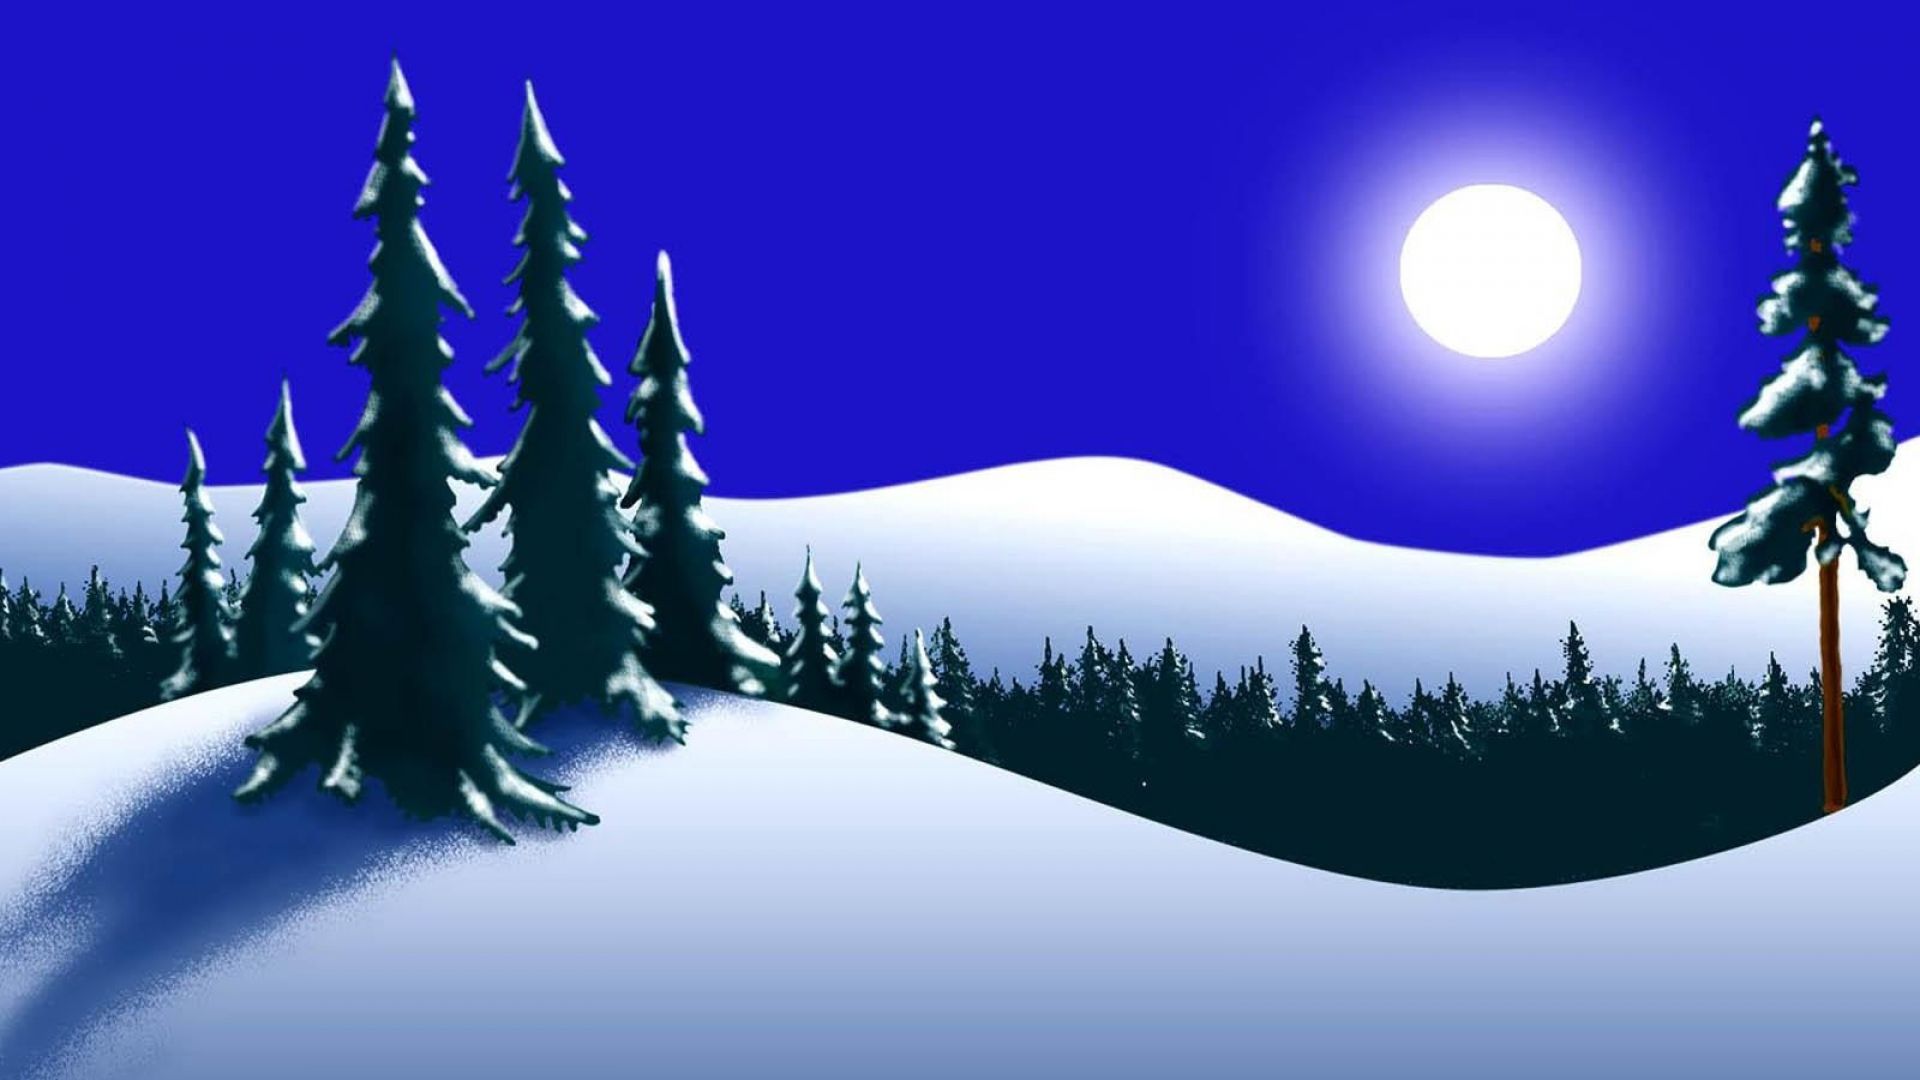 Download Wallpaper 1920x1080 trees, forest, winter, moon, night Full HD 1080p HD Background